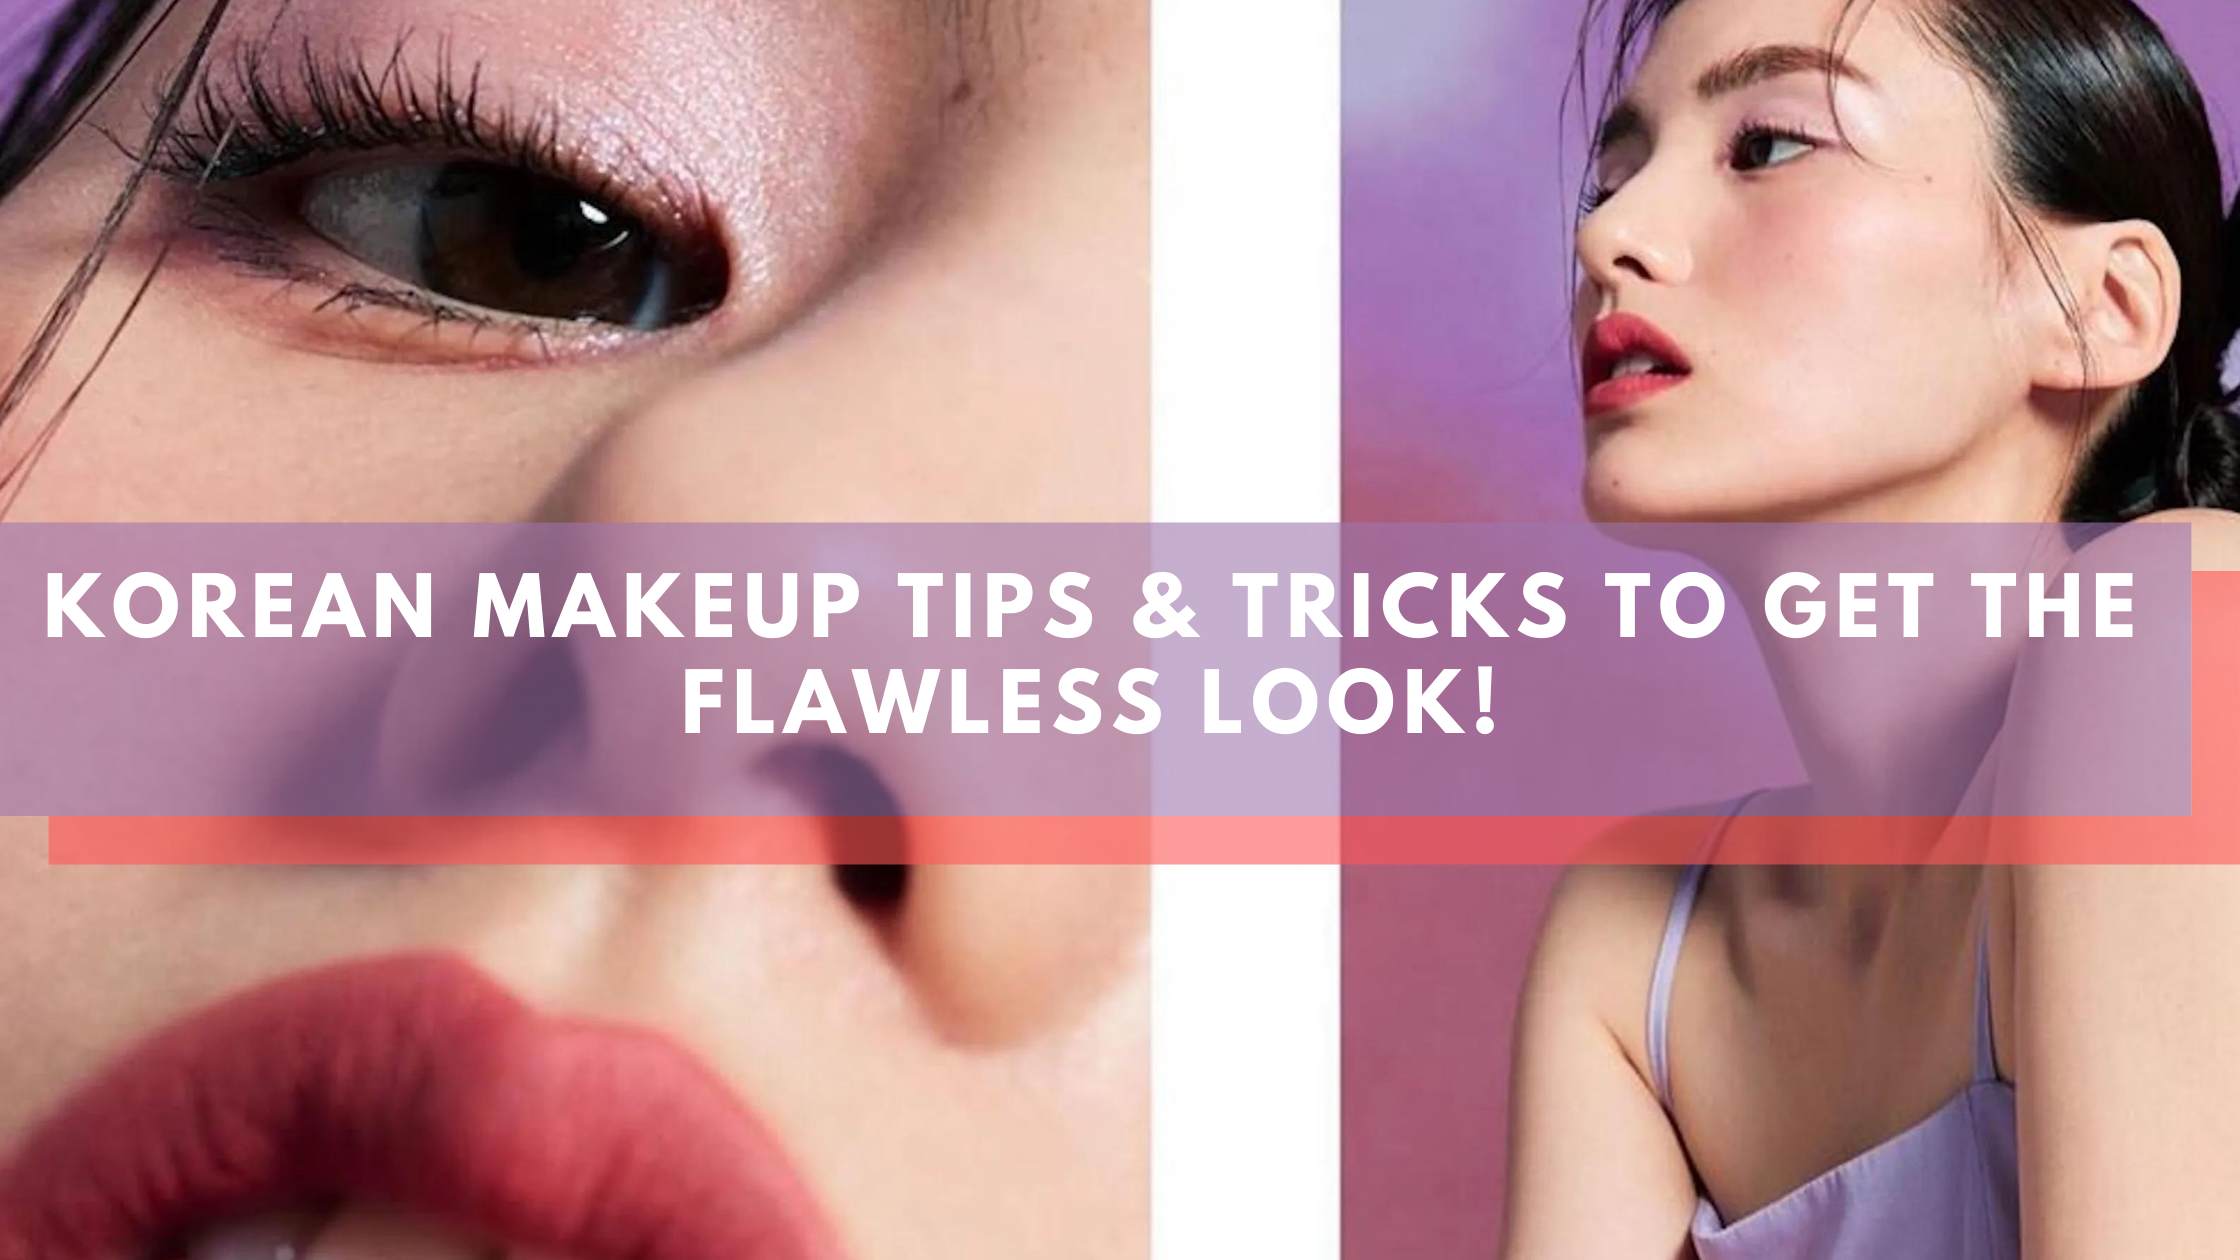 Makeup Tips & Tricks Get the Flawless Look! – Seoulbox